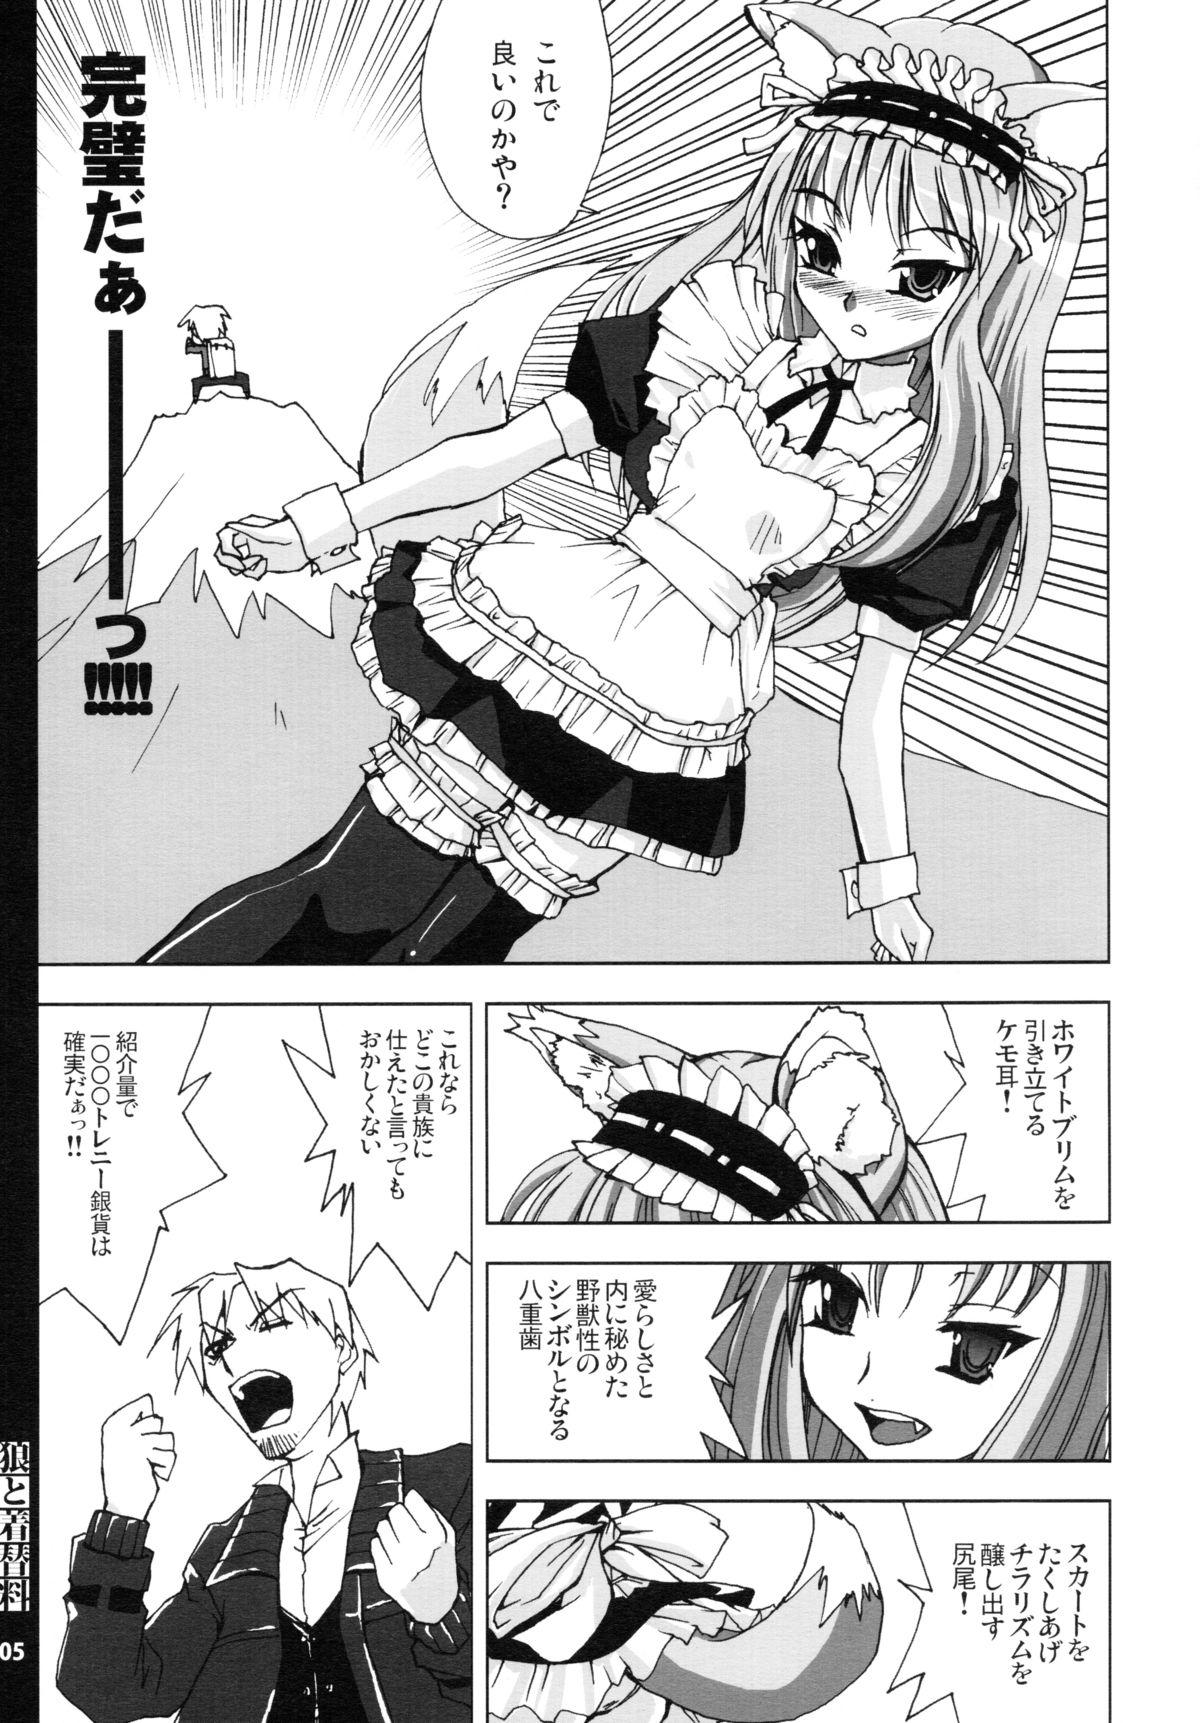 Egypt Ookami to Cosplay-ryou - Spice and wolf Ex Girlfriends - Page 5